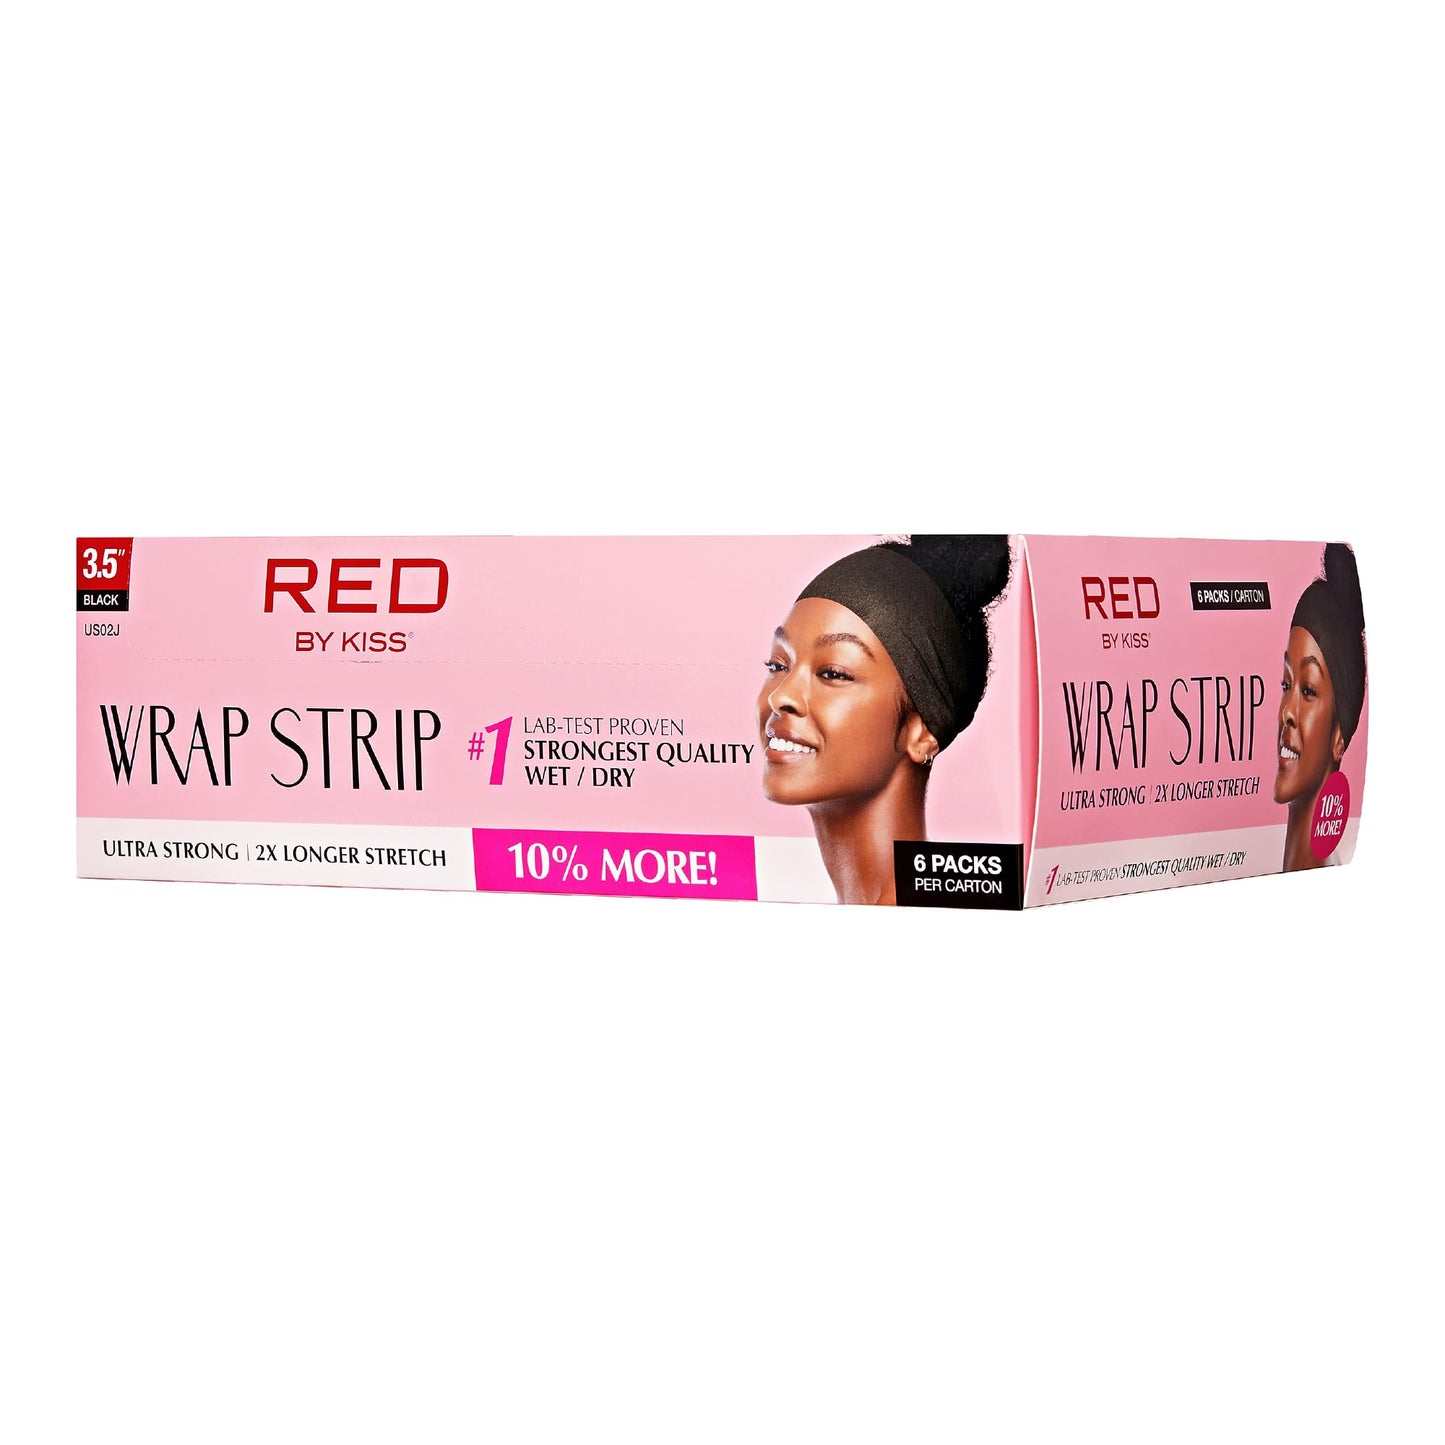 Red by Kiss Wrap Strip, Ultra Strong 2X Longer Stretch Wide Styling Wrap, 44 Strips, Wrap Strip for Natural Hair and Molded Styles, Suitable for Wet/Dry Hair, Black-3.5" (6 PACK)